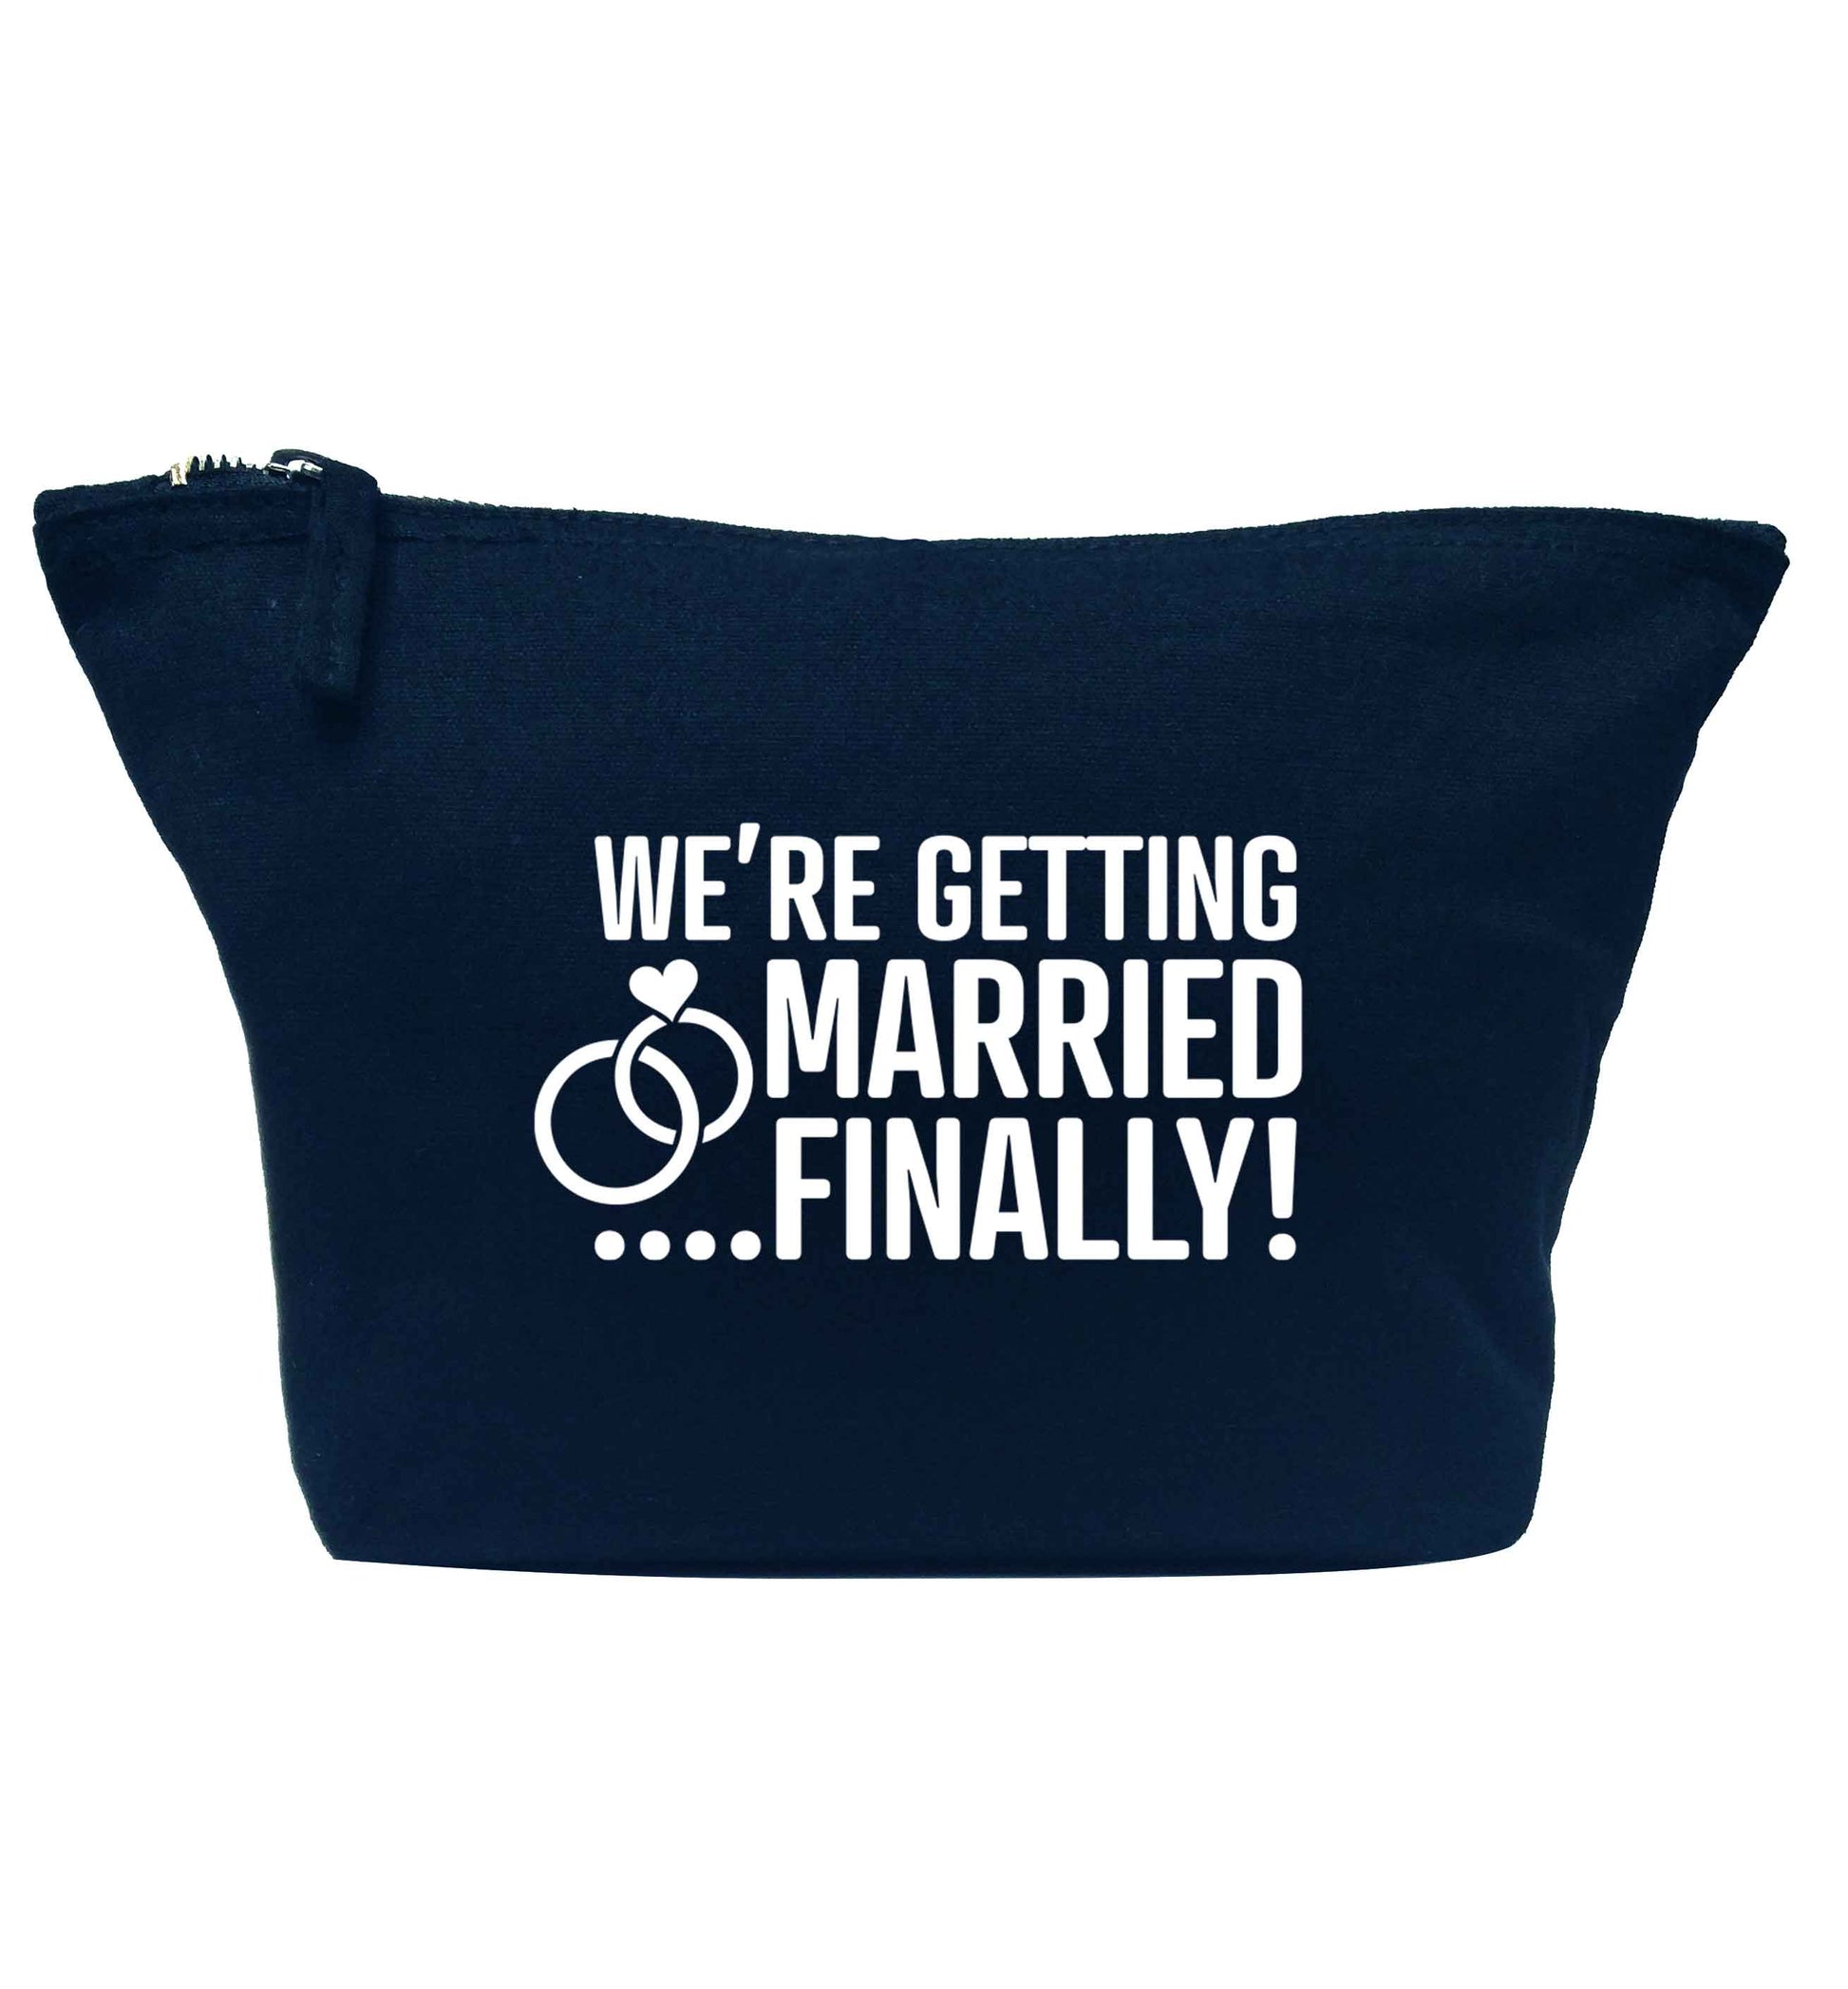 It's been a long wait but it's finally happening! Let everyone know you're celebrating your big day soon! navy makeup bag